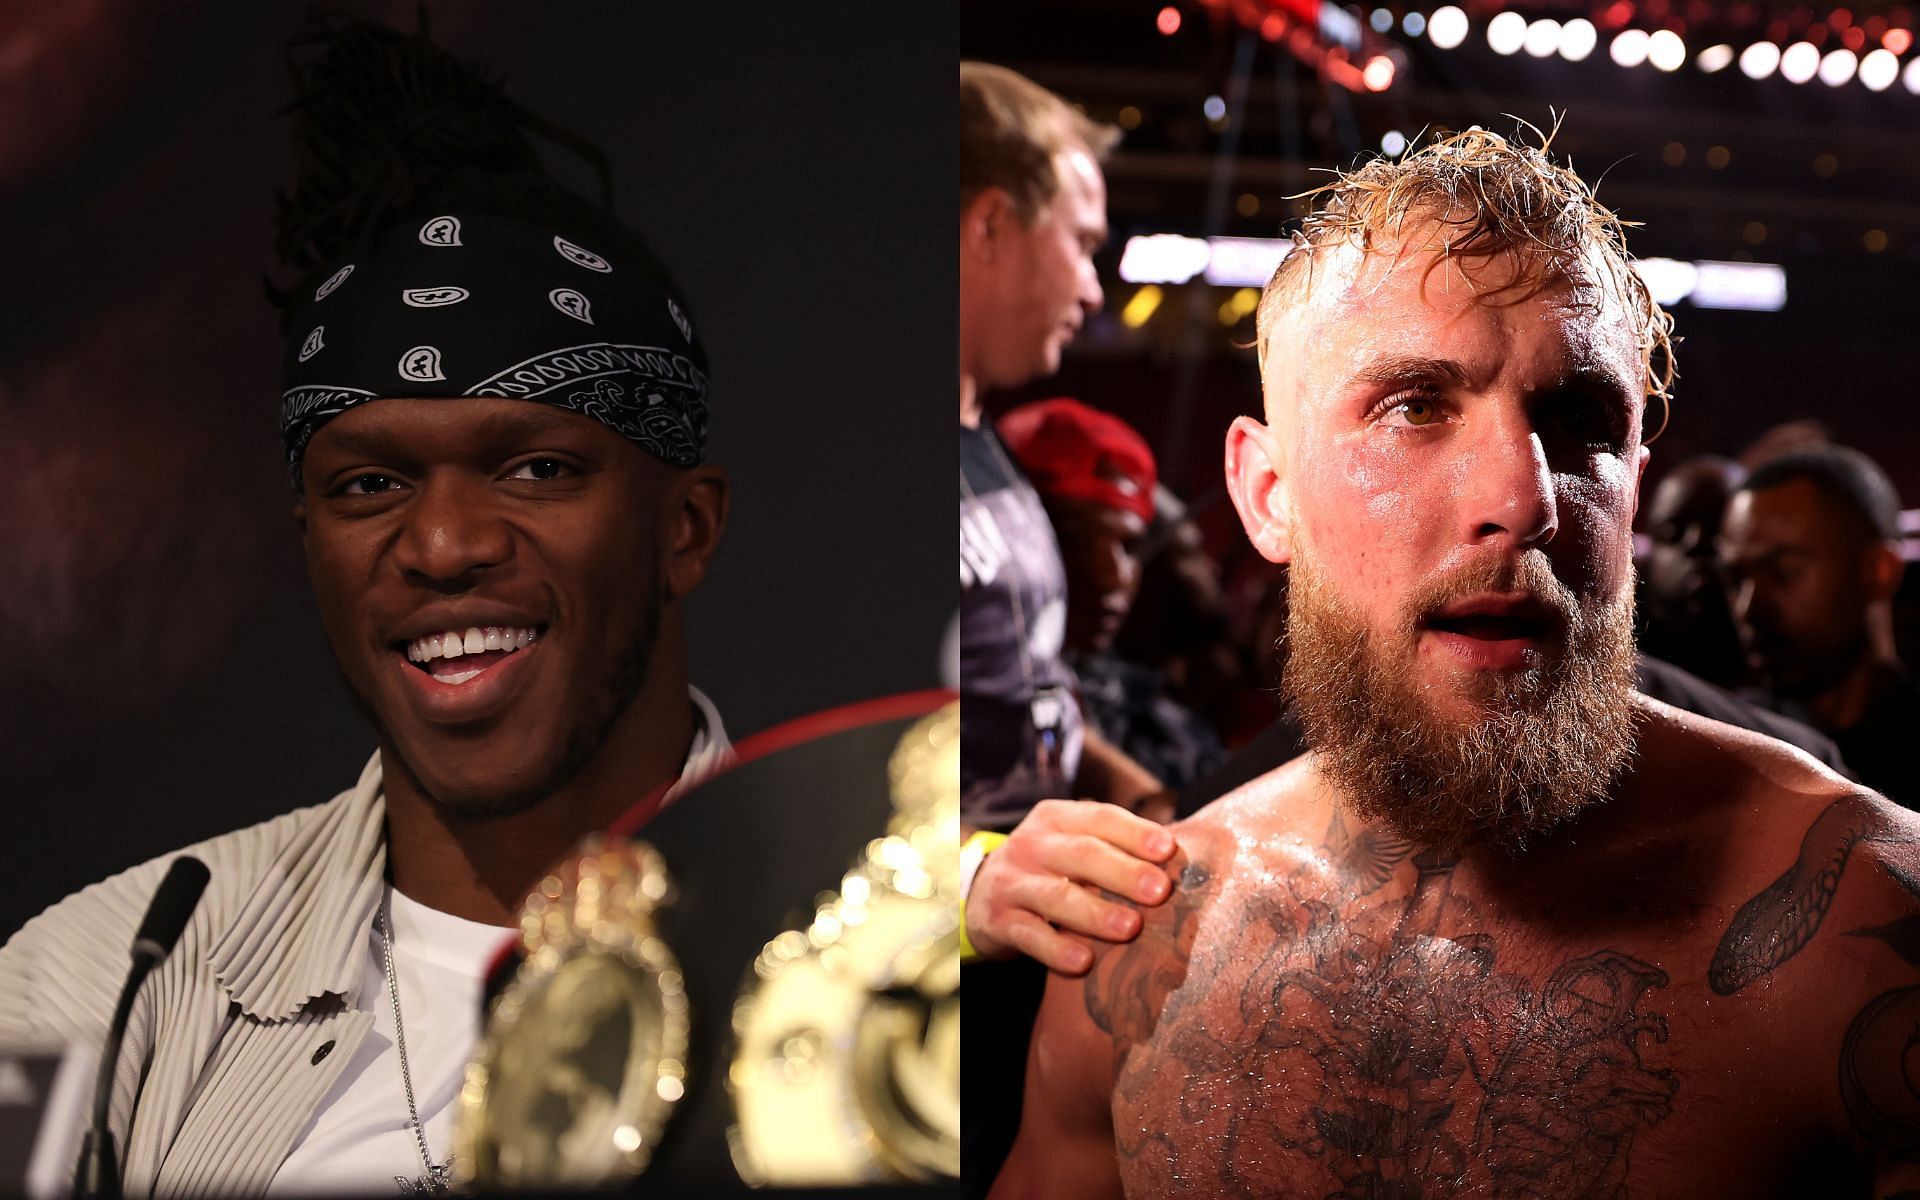 KSI (left) and Jake Paul (right) (Image credits Getty Images)